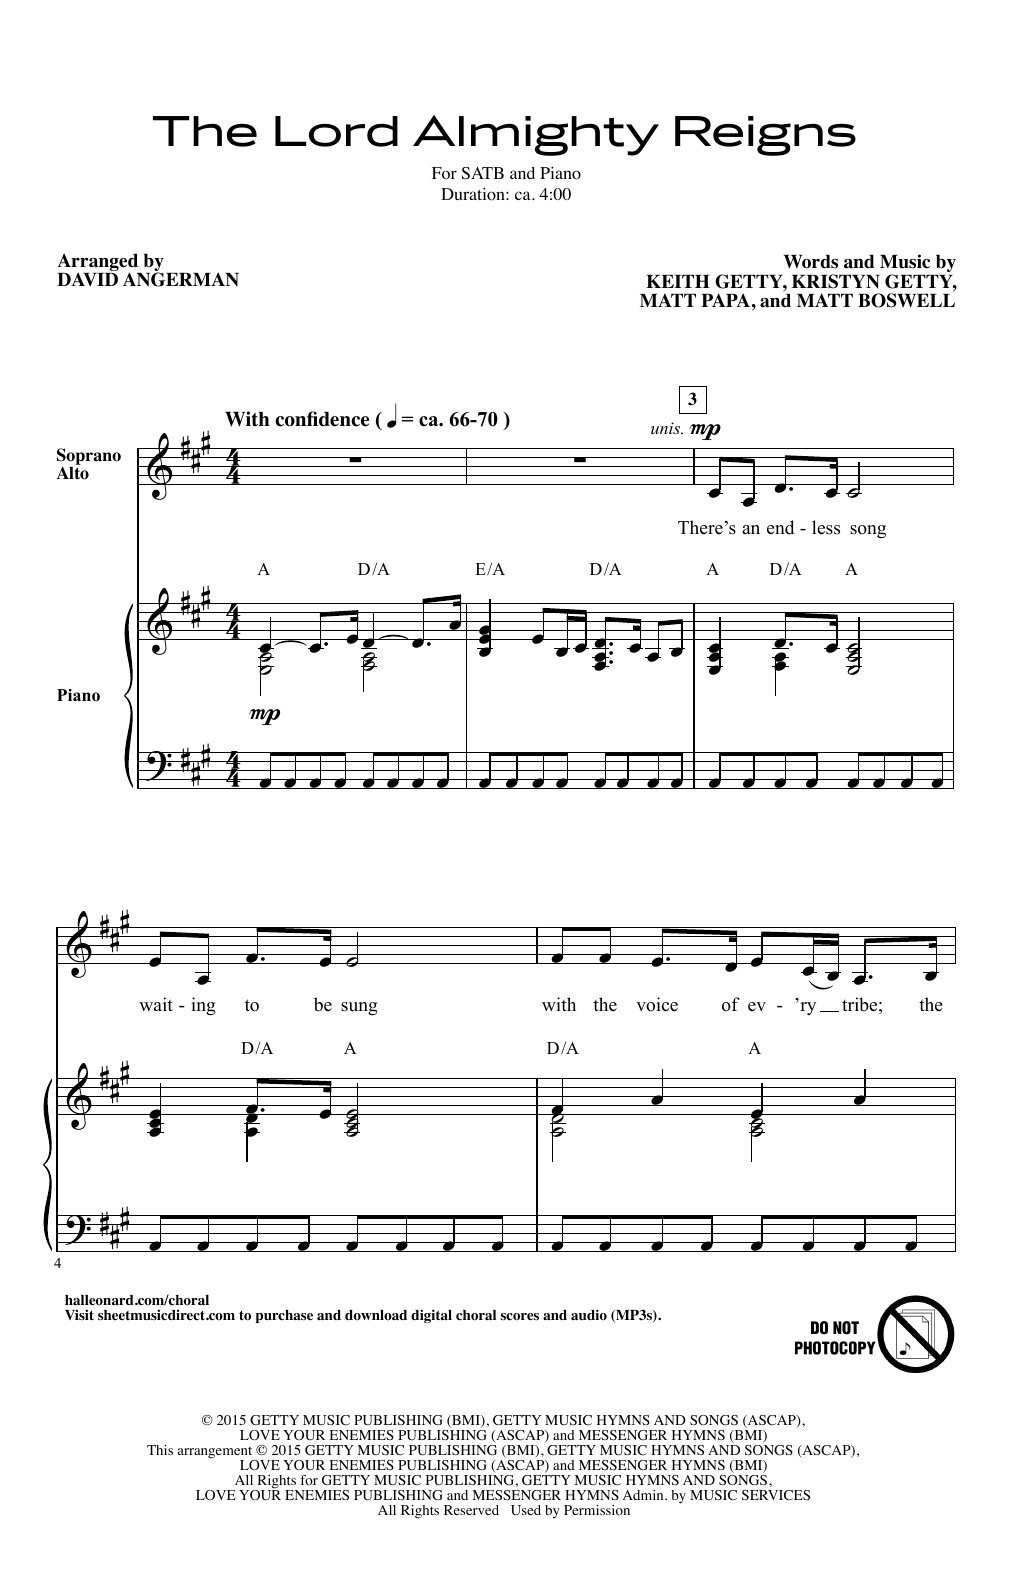 Keith & Kristyn Getty The Lord Almighty Reigns (arr. David Angerman) sheet music notes printable PDF score